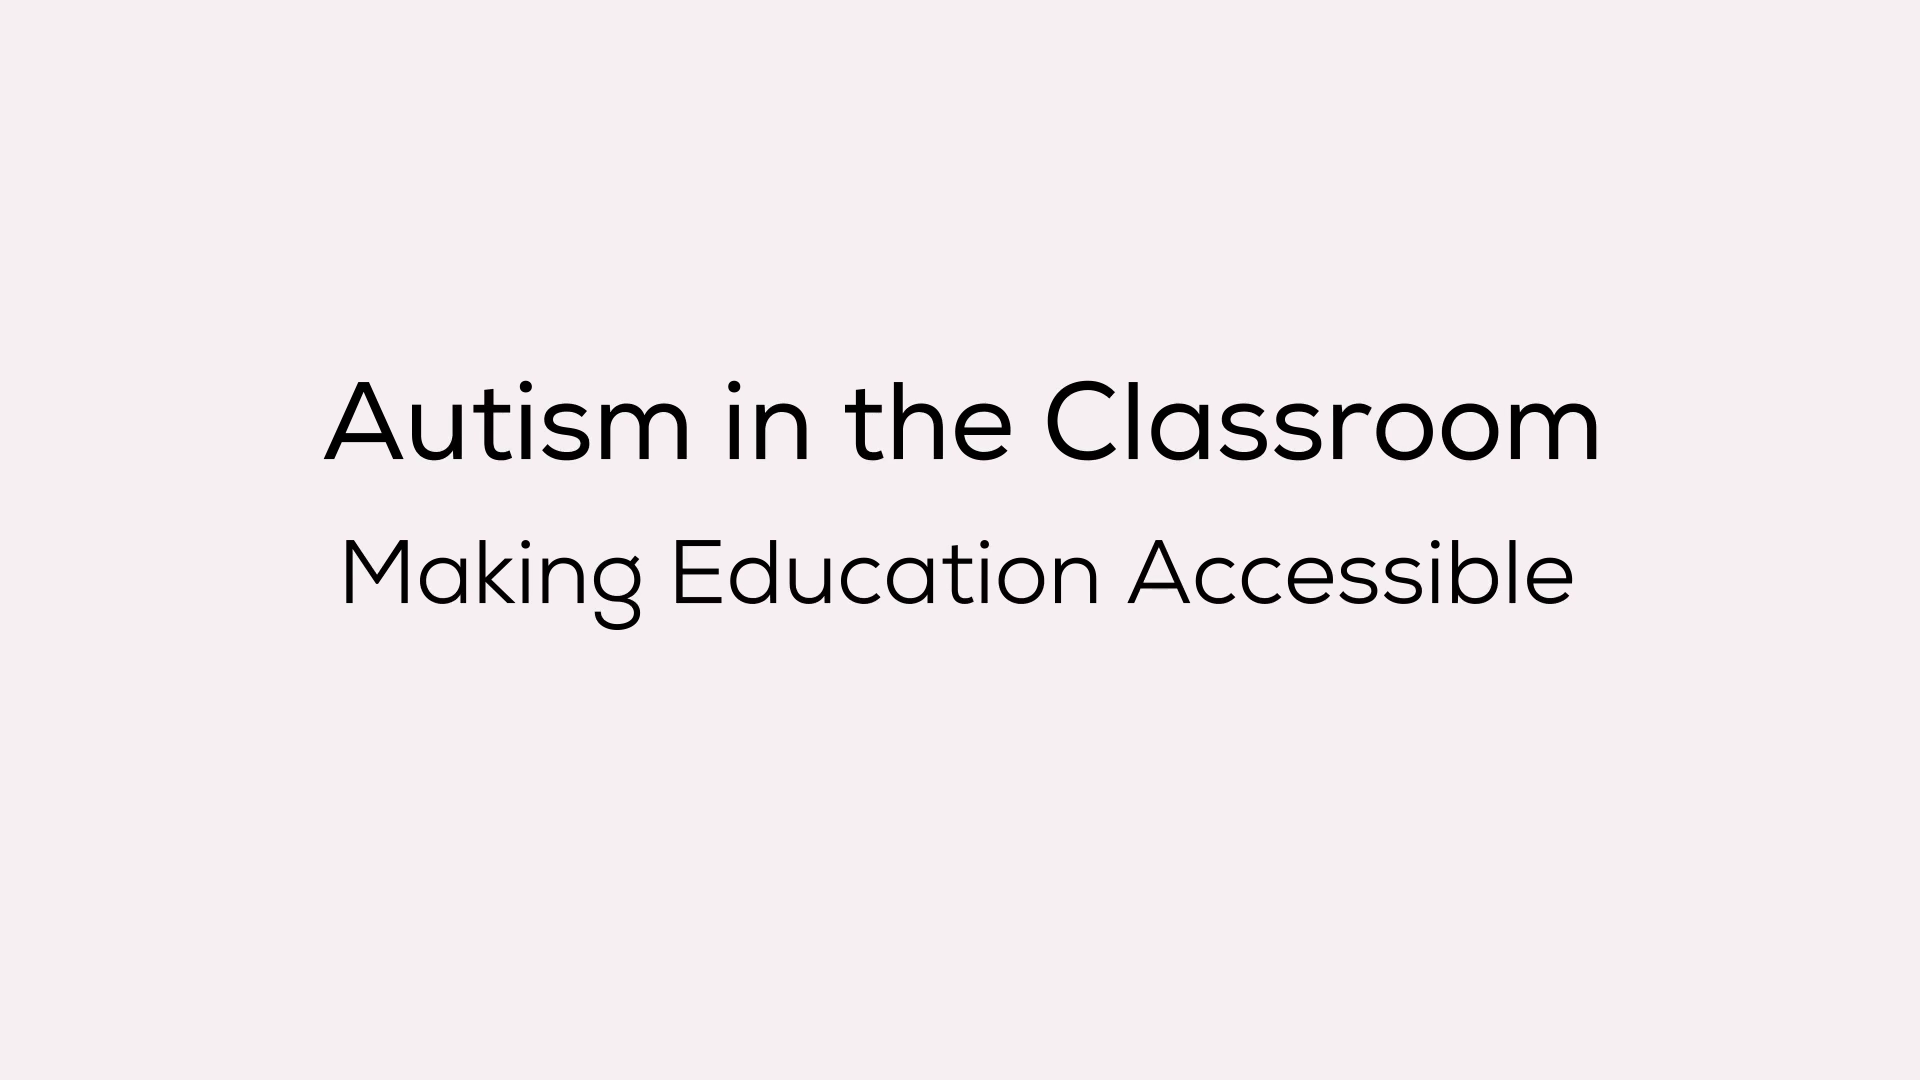 autism-in-the-classroom-making-education-accessible-stairway-to-stem